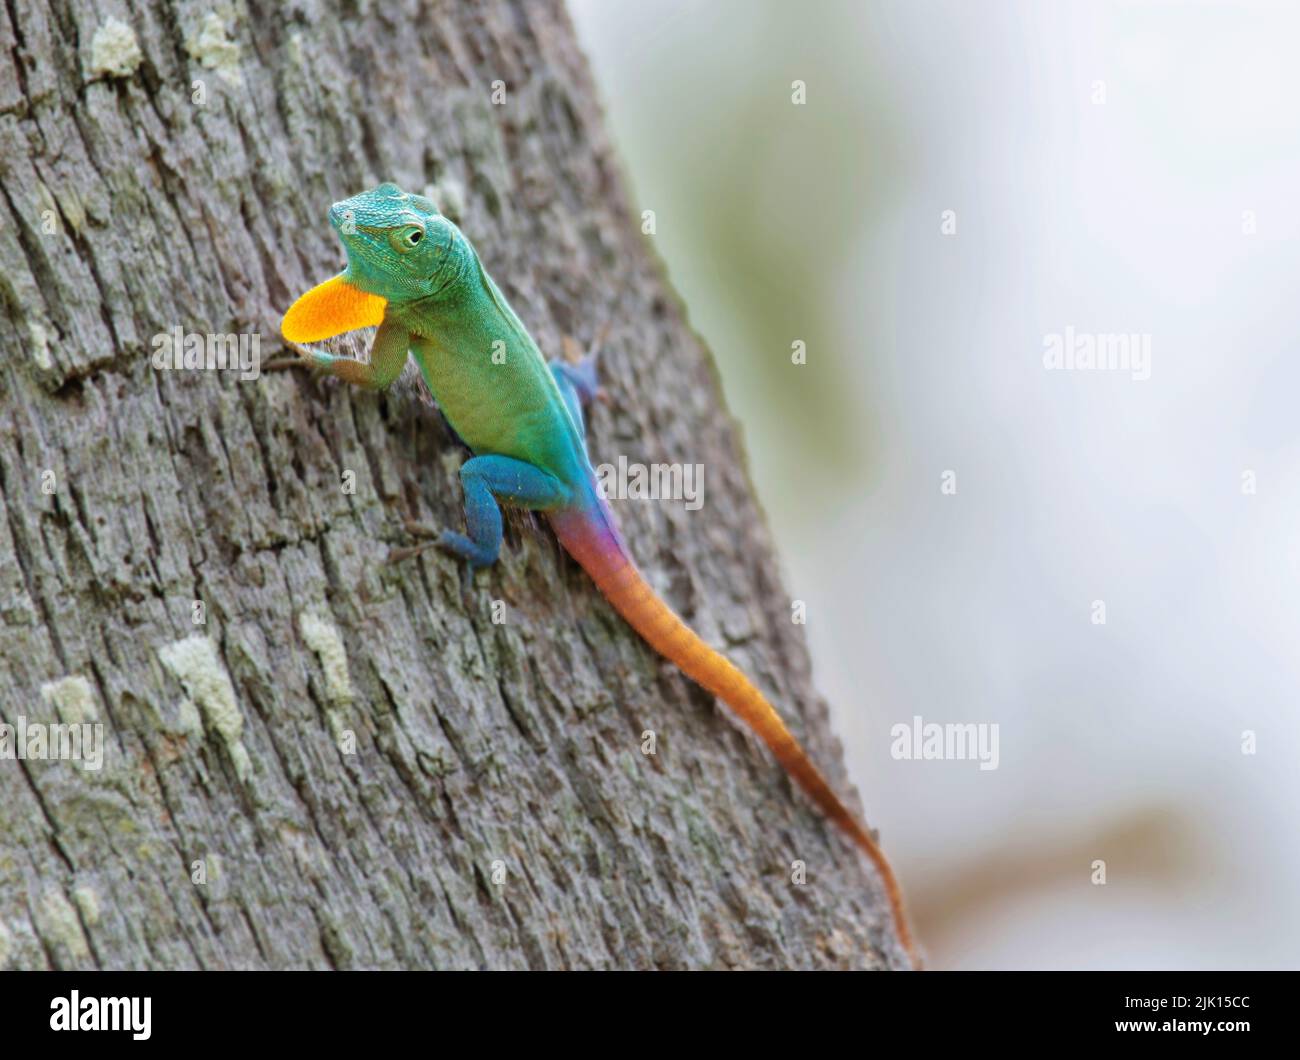 Male Jamaican Anole Lizard (Anolis Grahami) with Dewlap extended, introduced to Bermuda in 1905 to eat fruit flies, Bermuda, Atlantic, Central America Stock Photo